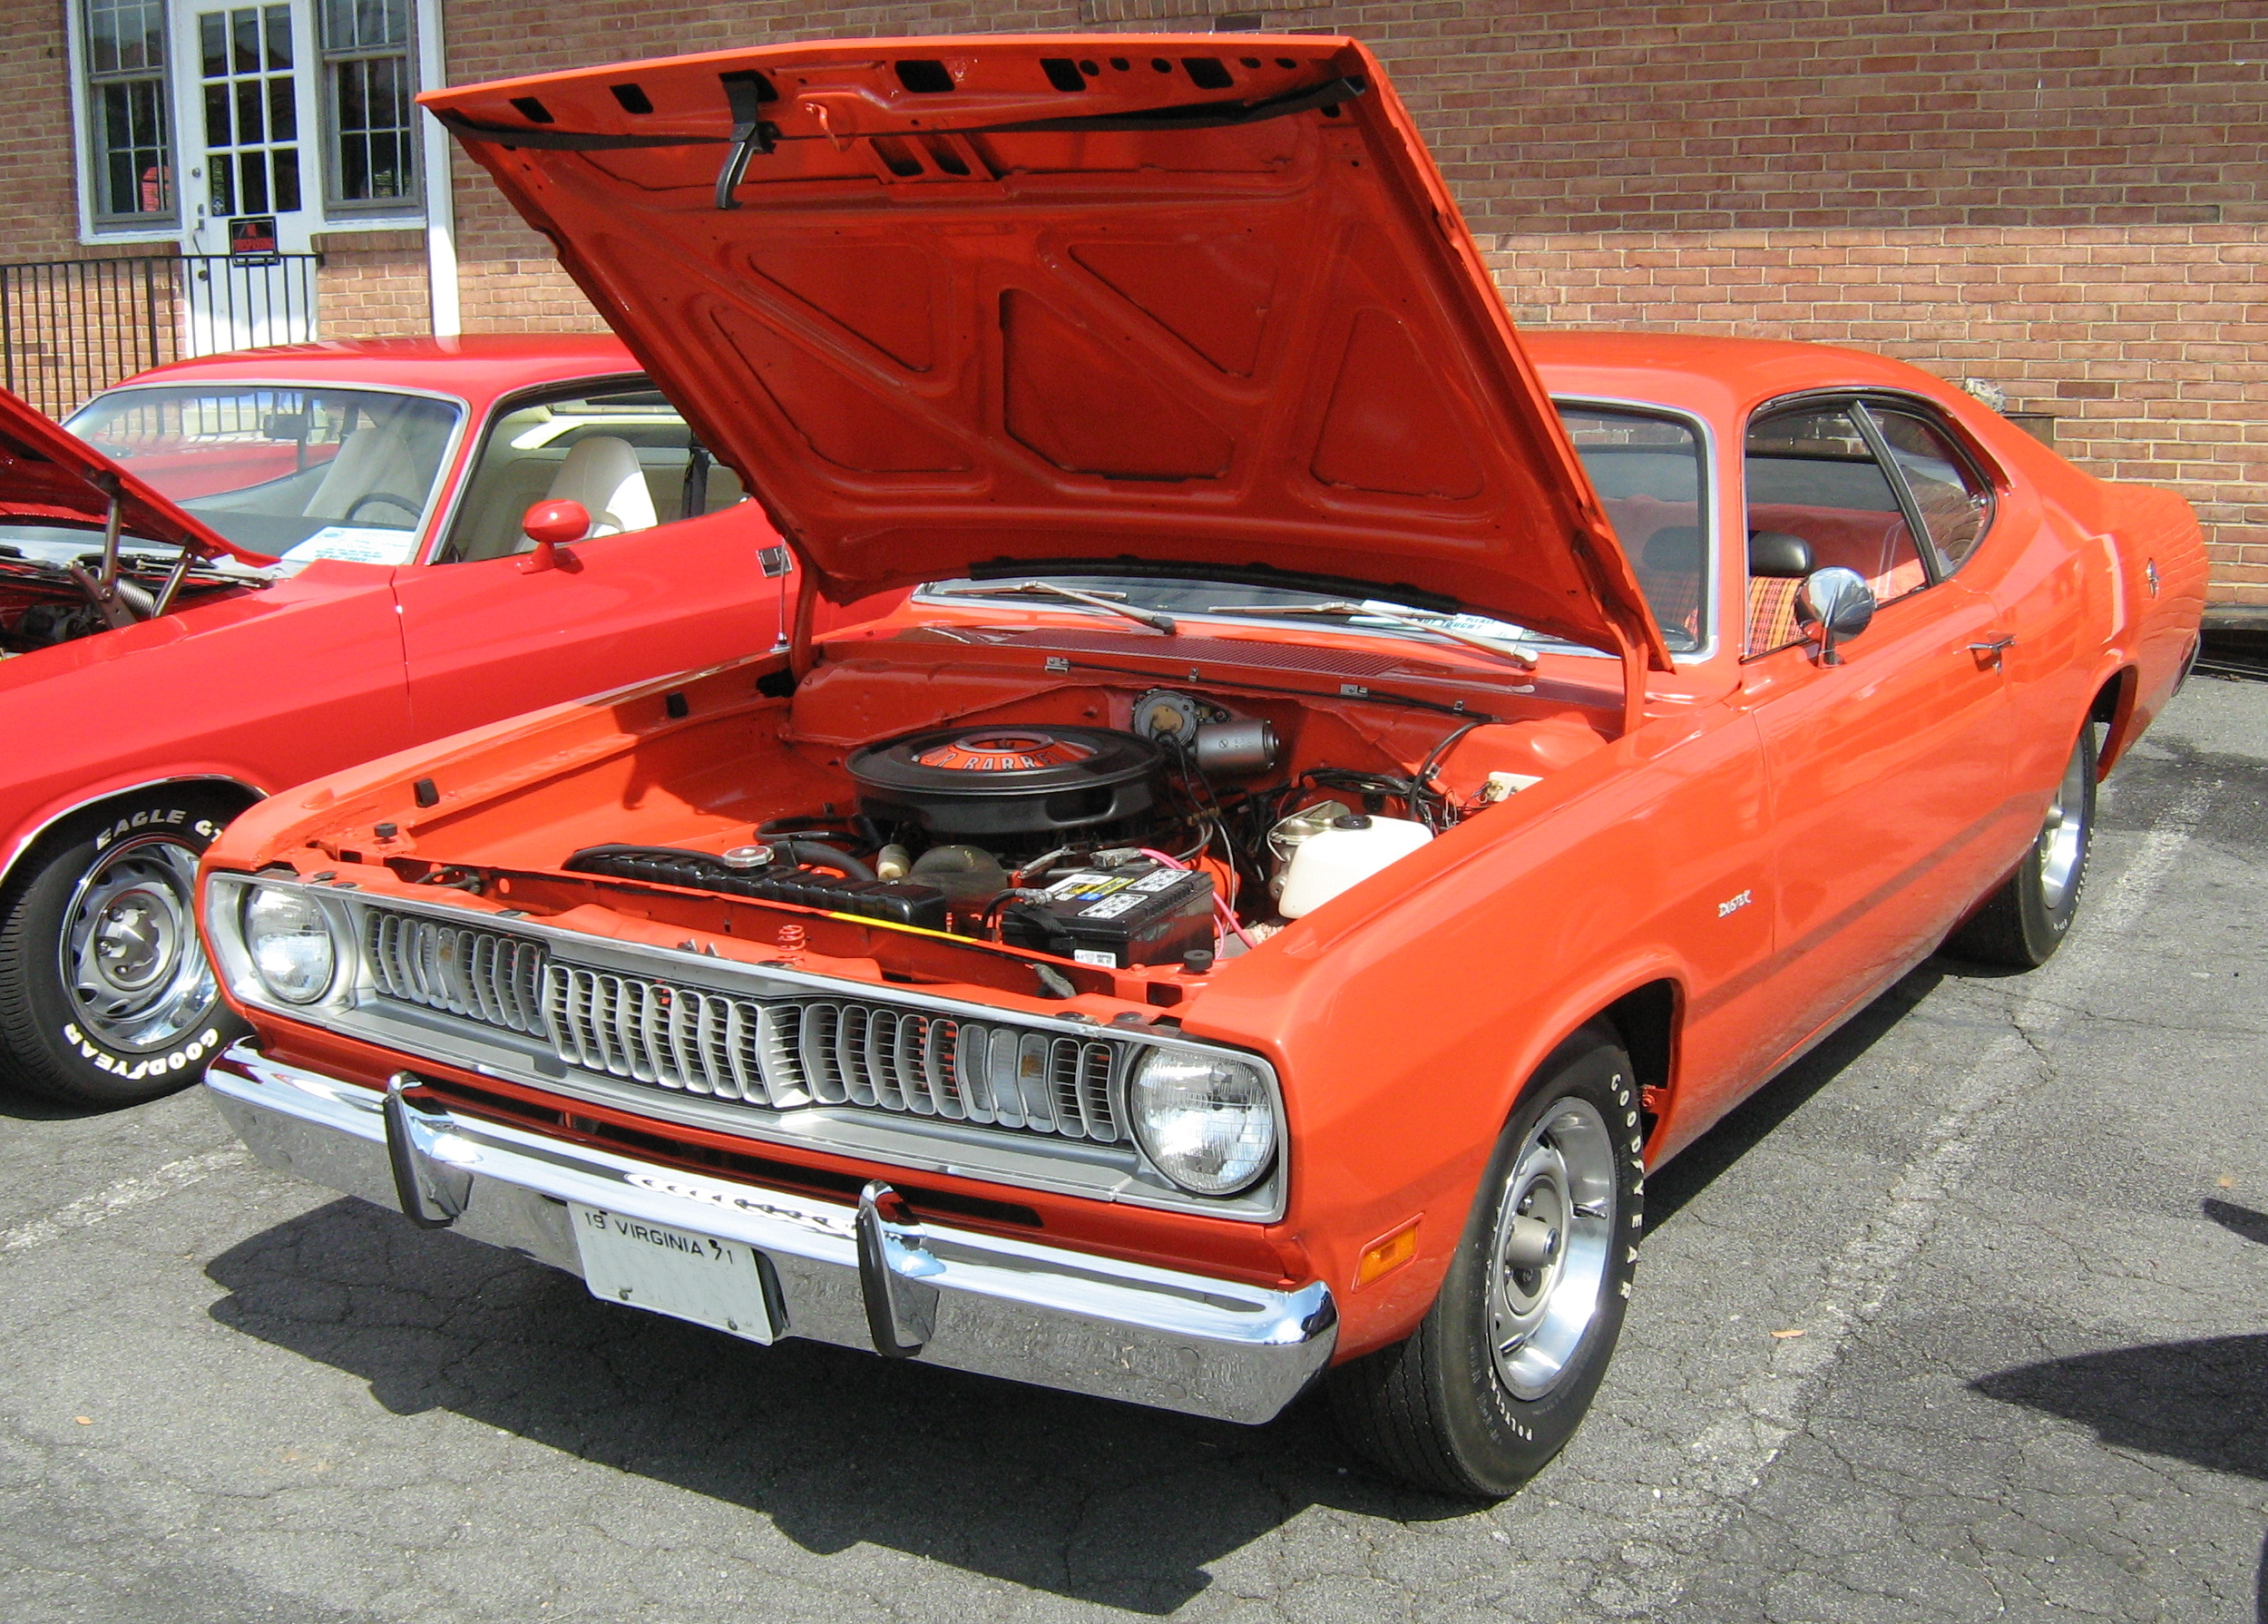 Plymouth Duster #1